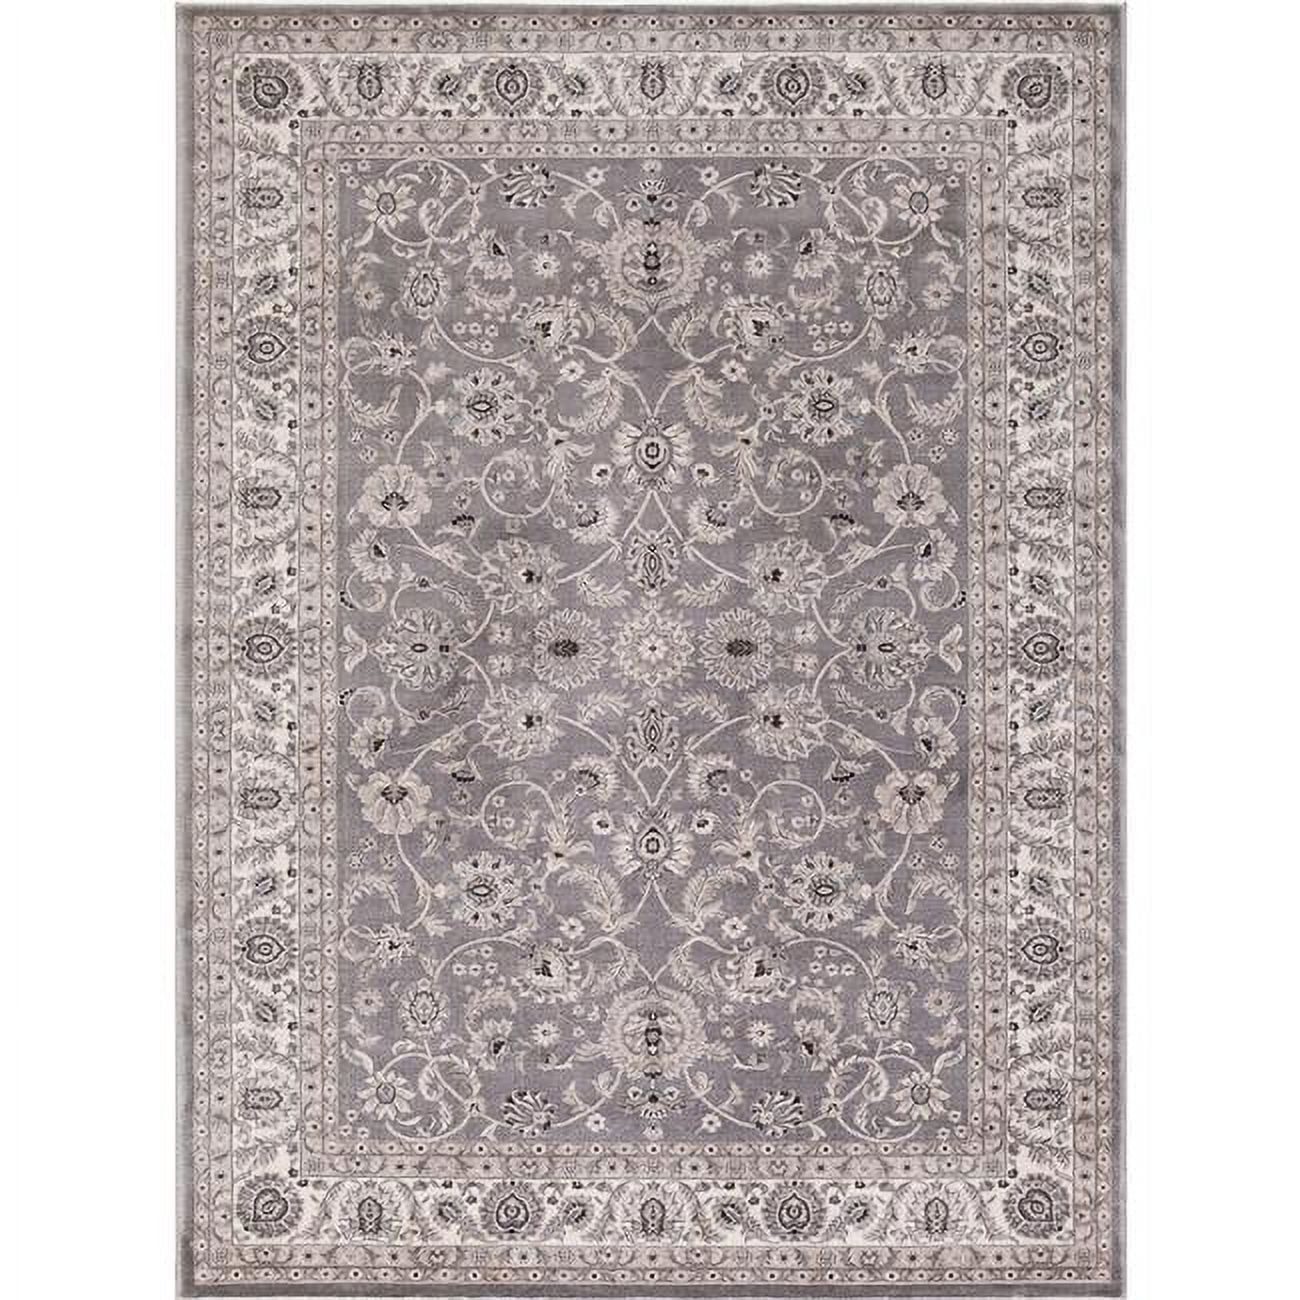 Picture of Concord Global 28165 5 ft. 3 in. x 7 ft. 3 in. Kashan Bergama - Grey